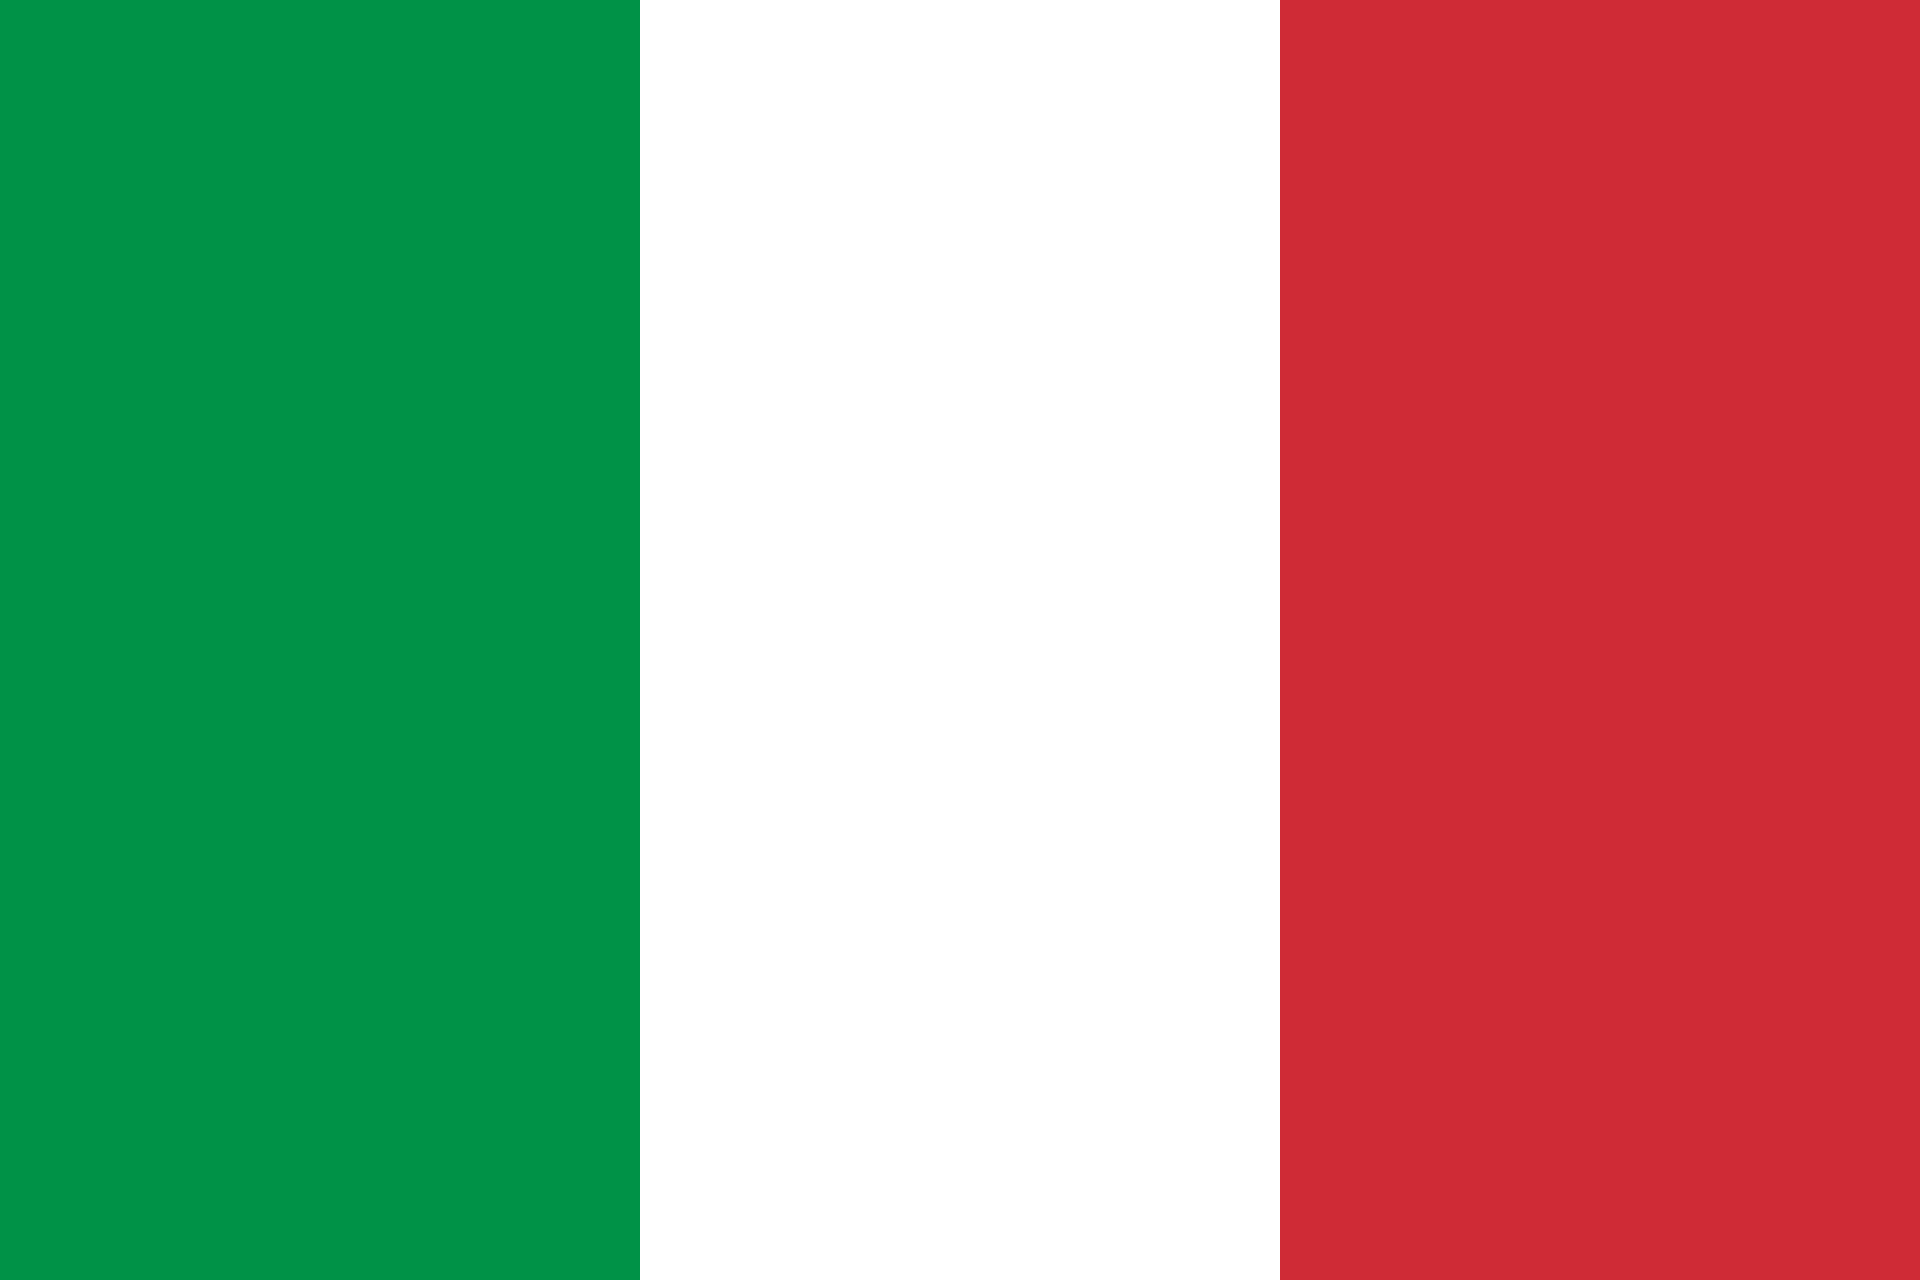 EGBA concern at reported size of online gambling black market in Italy